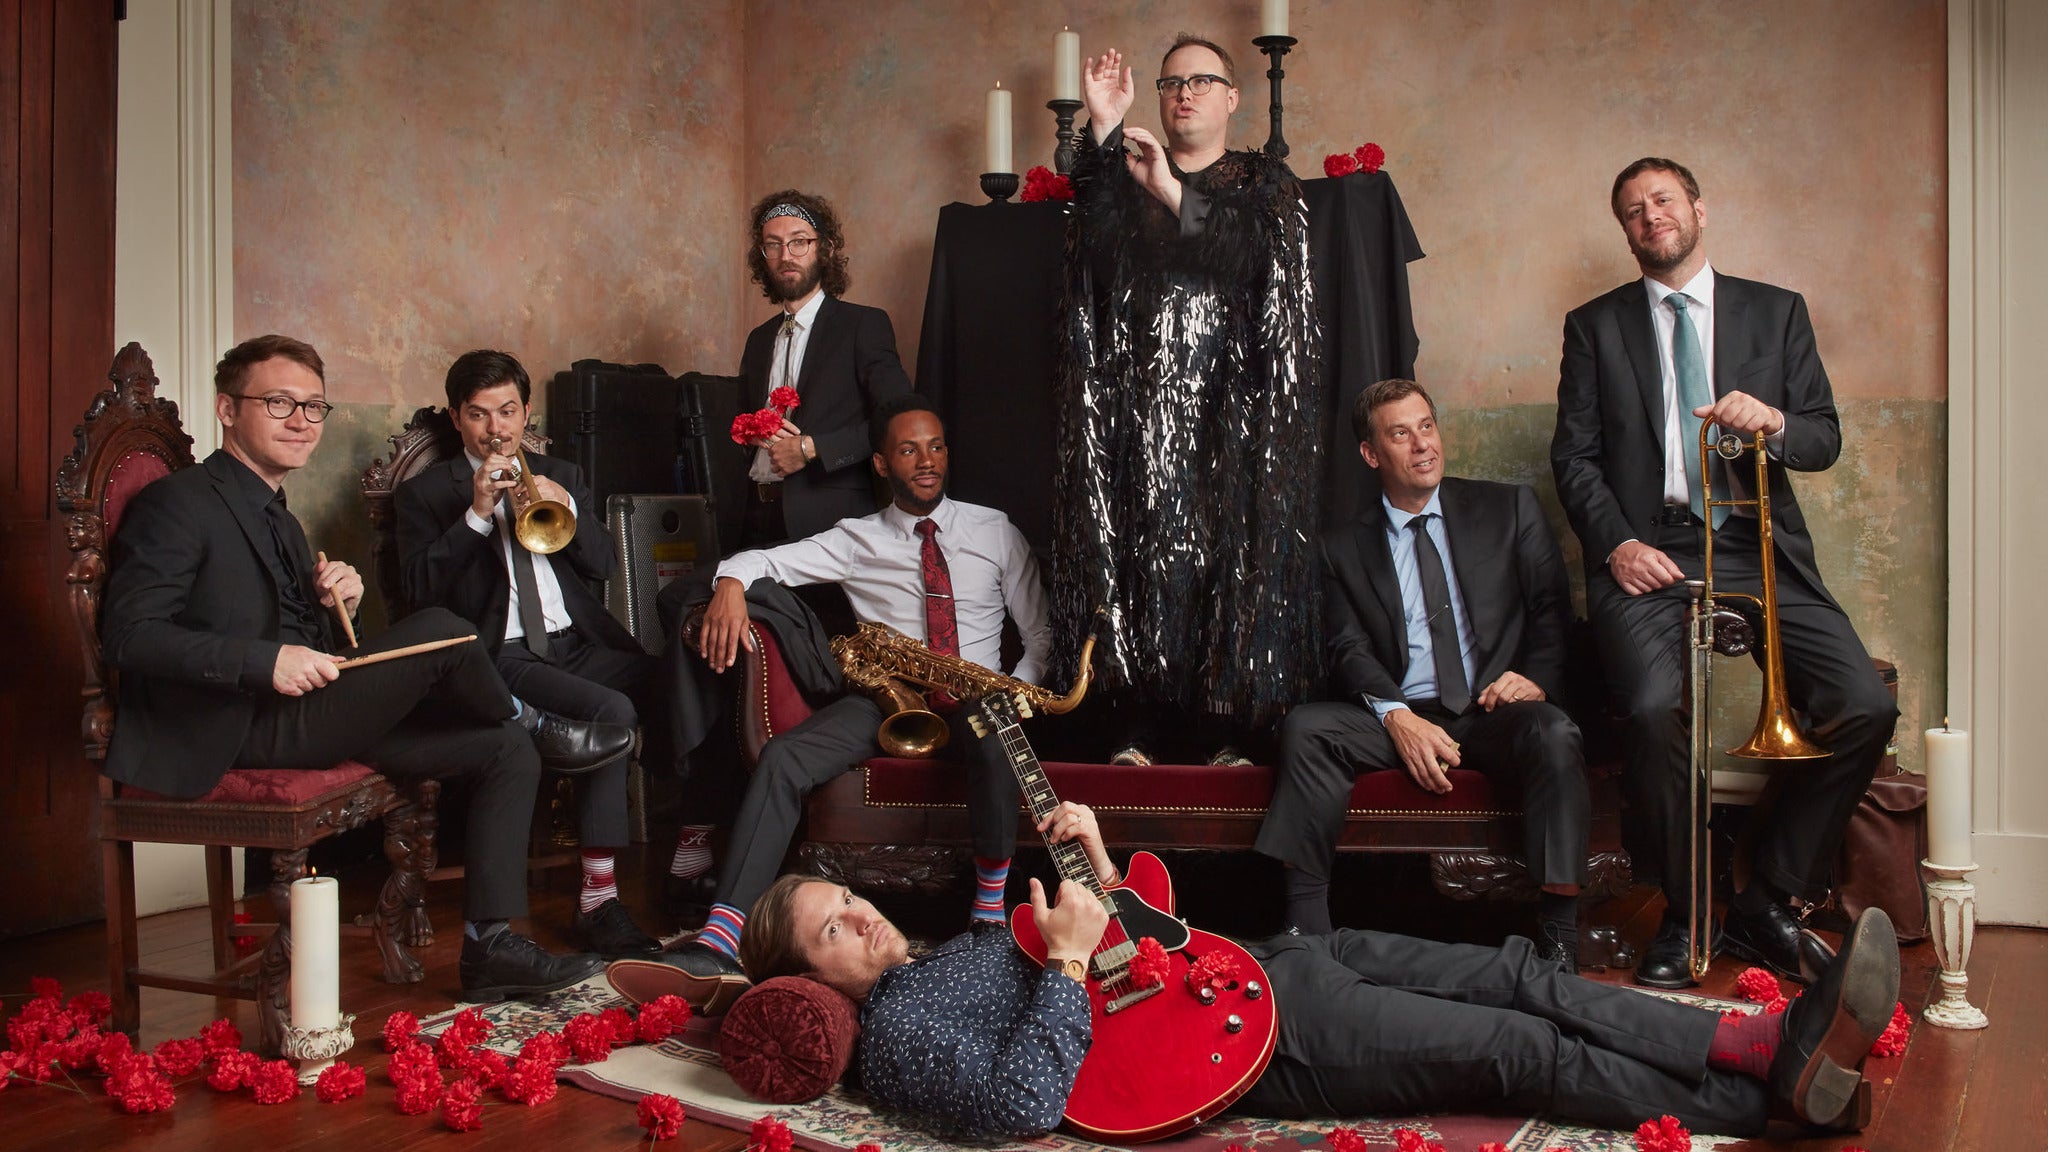 St. Paul and the Broken Bones in Montgomery promo photo for Exclusive presale offer code